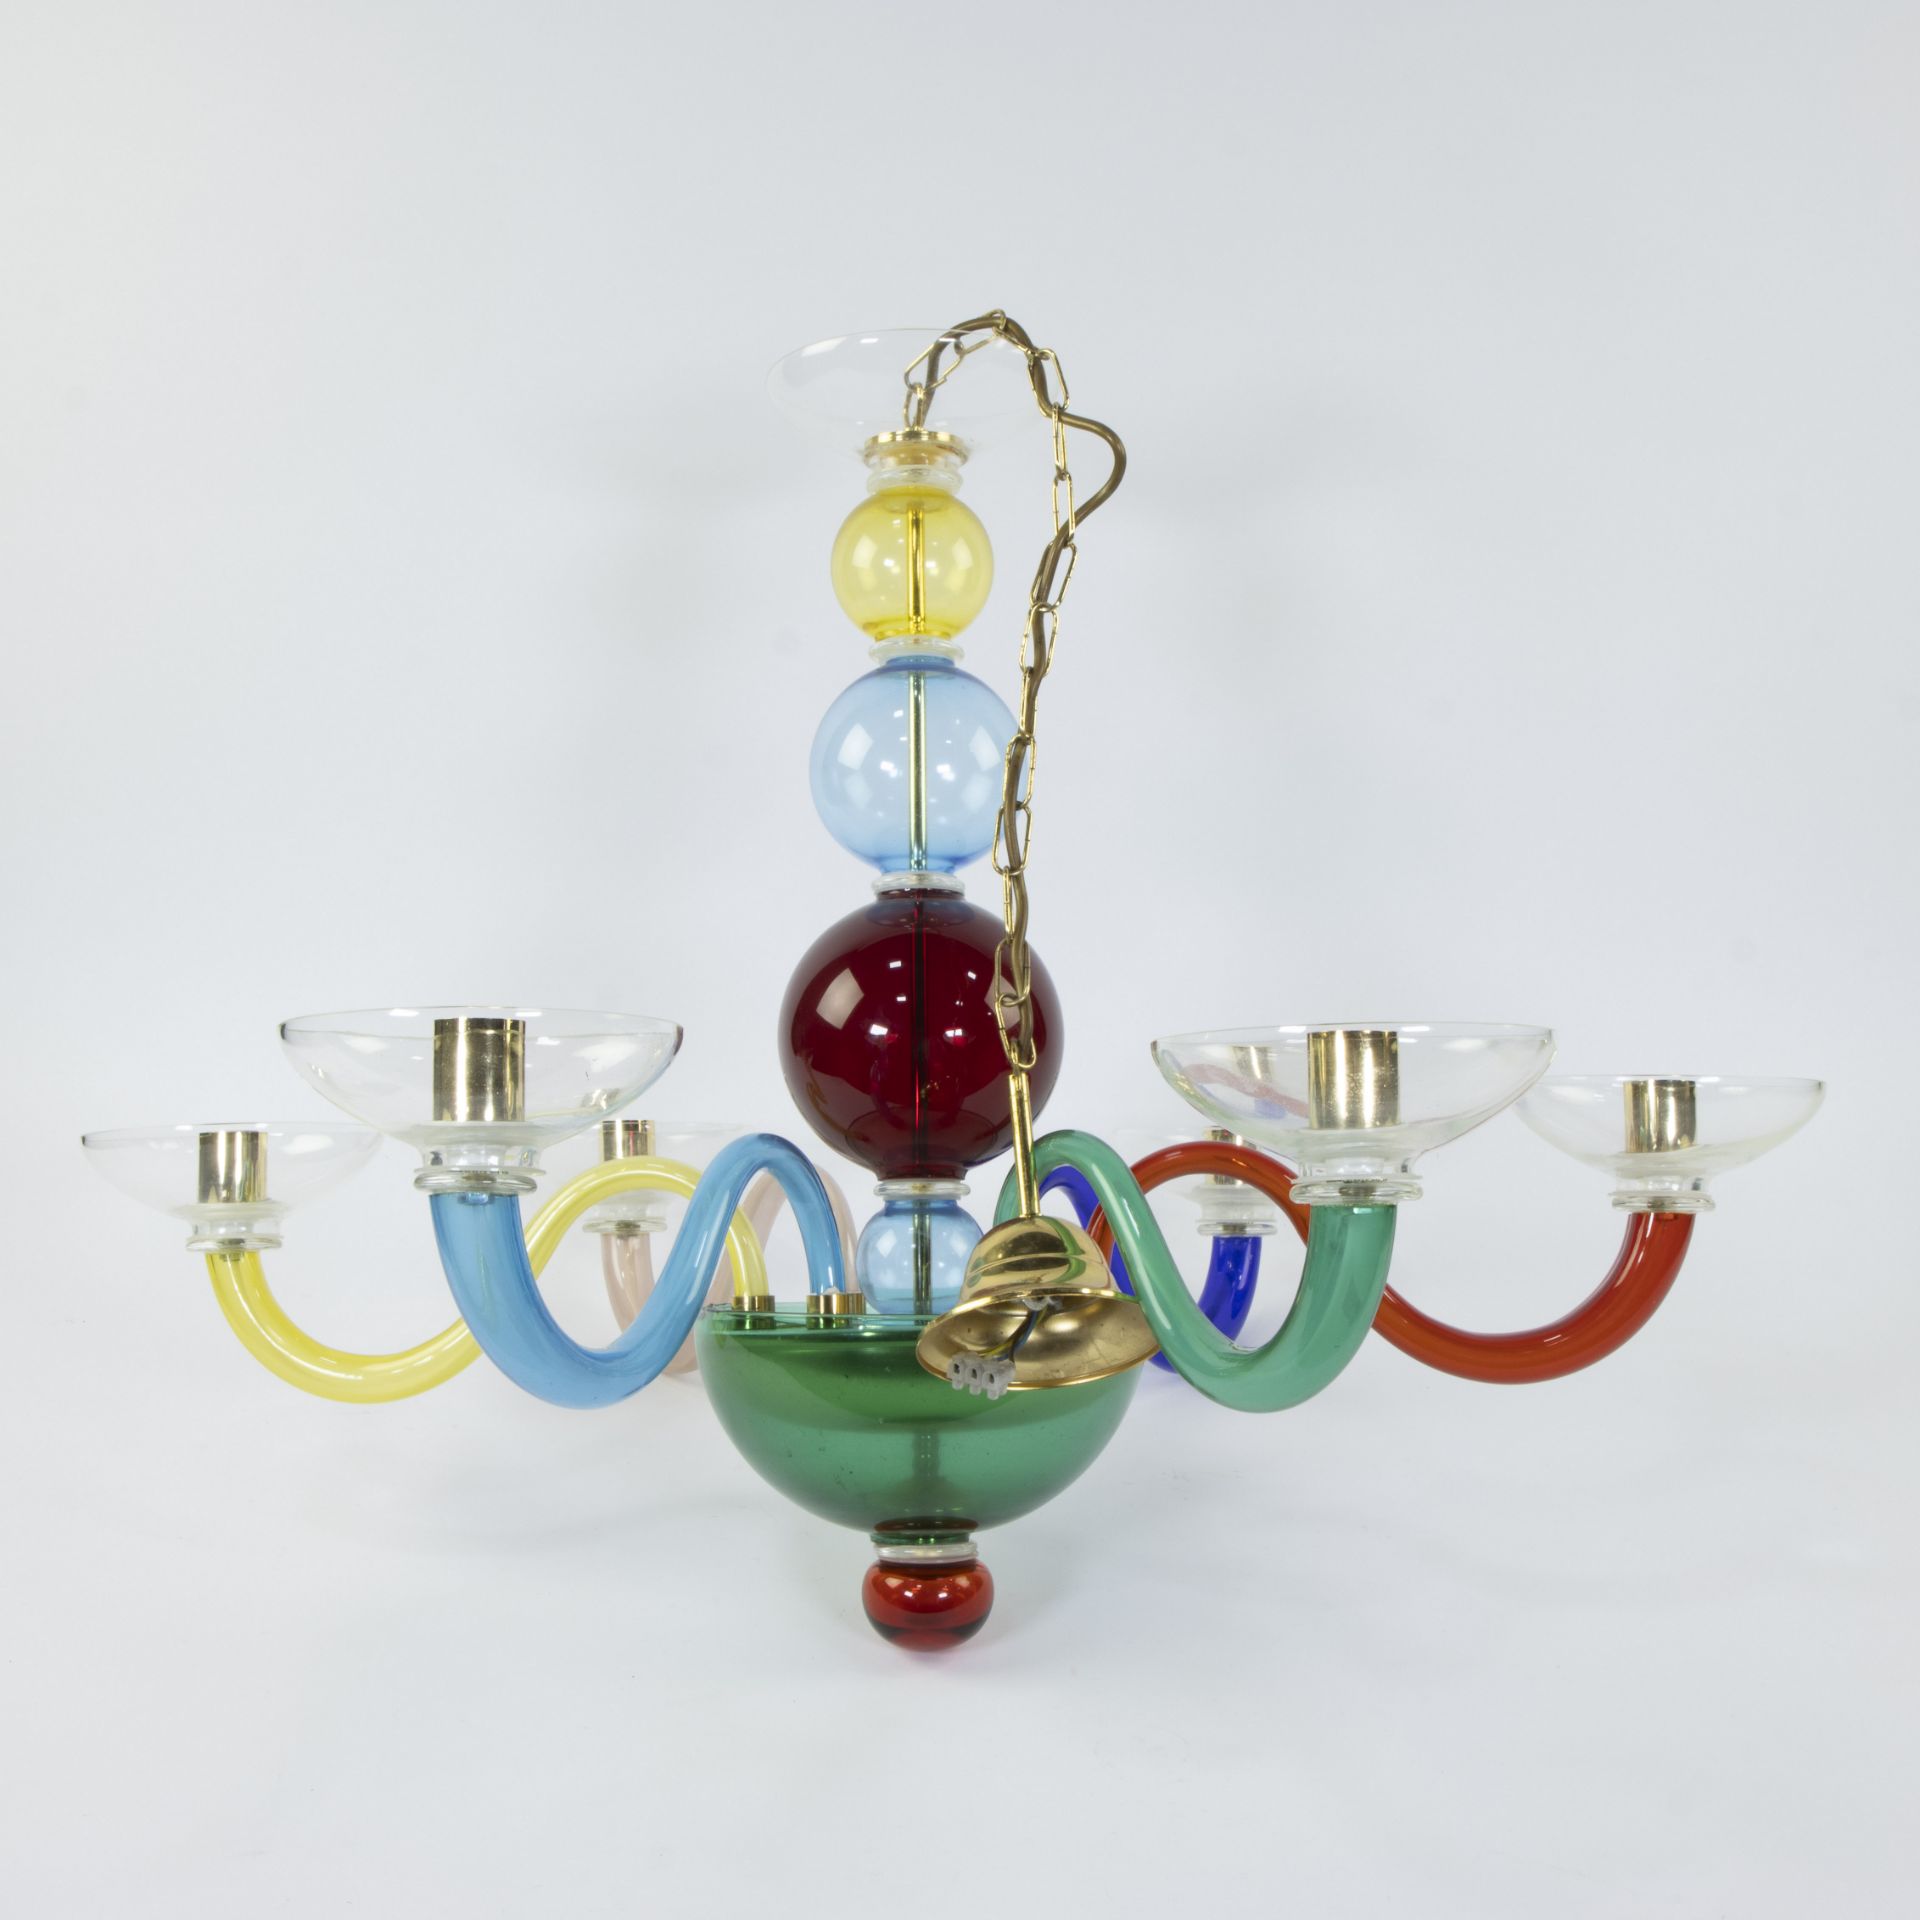 Chandelier with 6 arms after Gio Ponti, in transparent polychrome blown glass, 1980s - Bild 3 aus 4